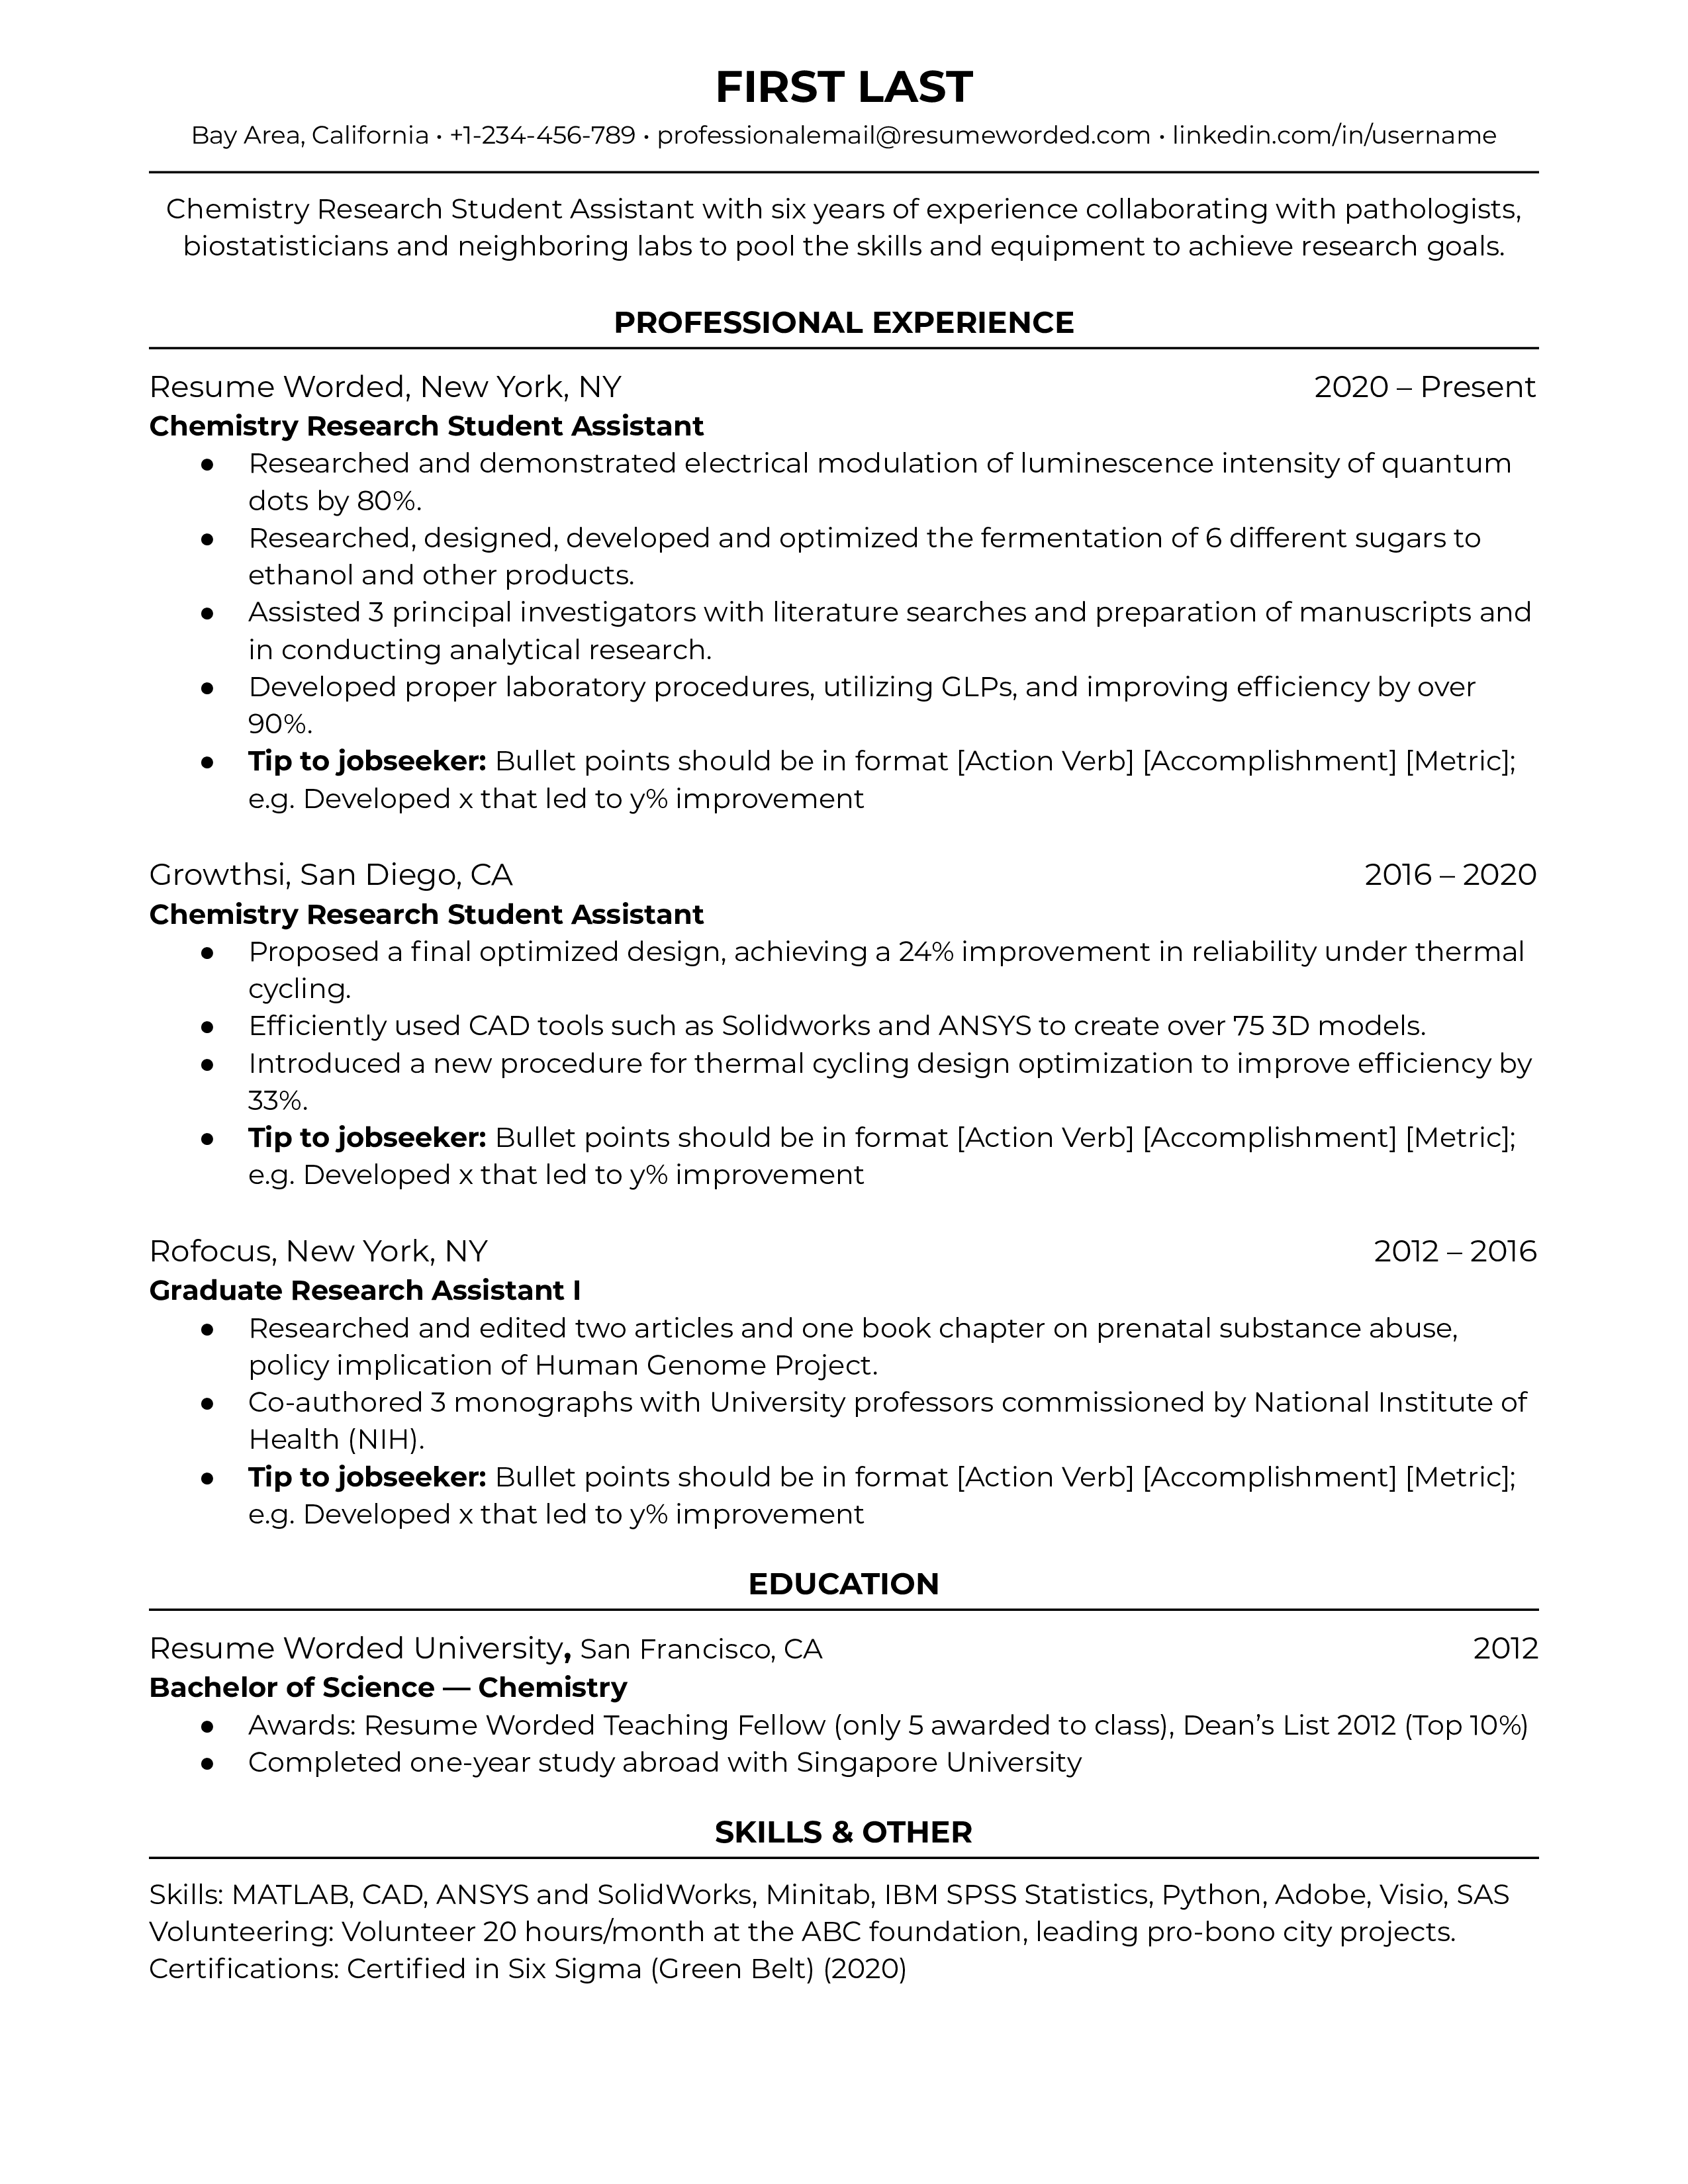 Chemistry Research Student Resume Template + Example